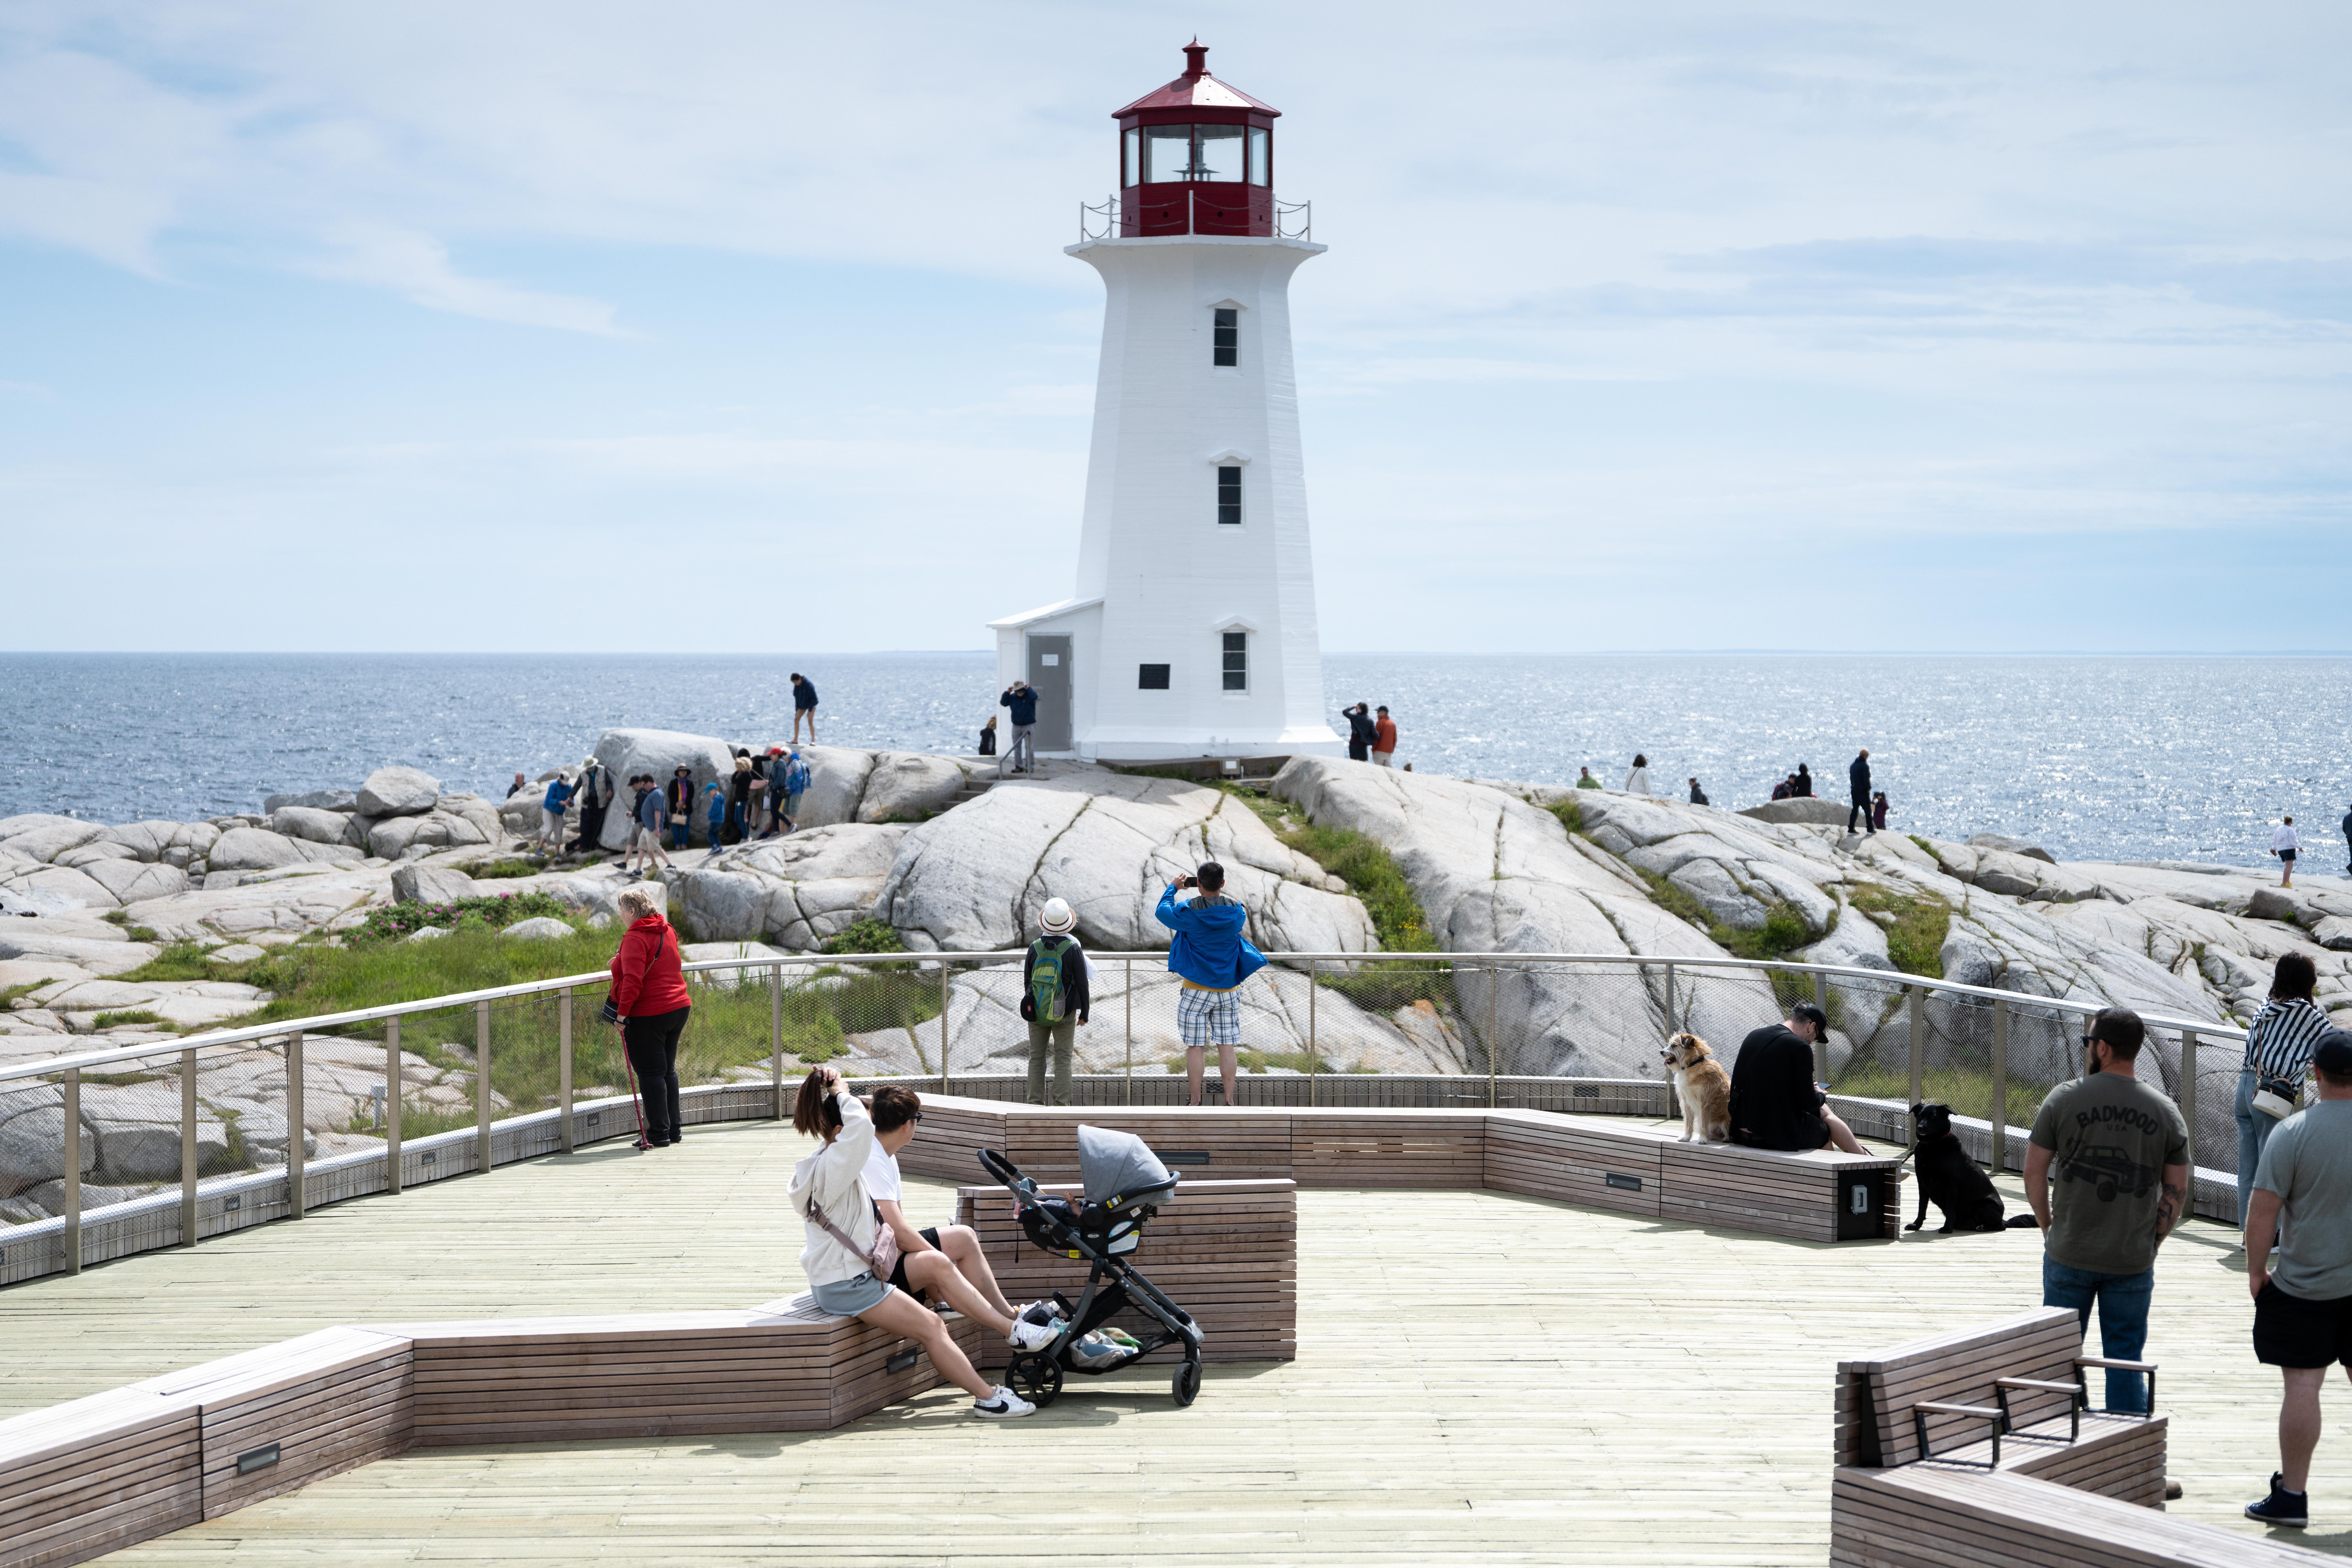 Front of the  Peggy's Cove viewing deck. There are many people using the viewing deck, which is in close proximity to the lighthouse. The lighthouse is white and red and is built on large rocks overlooks the ocean